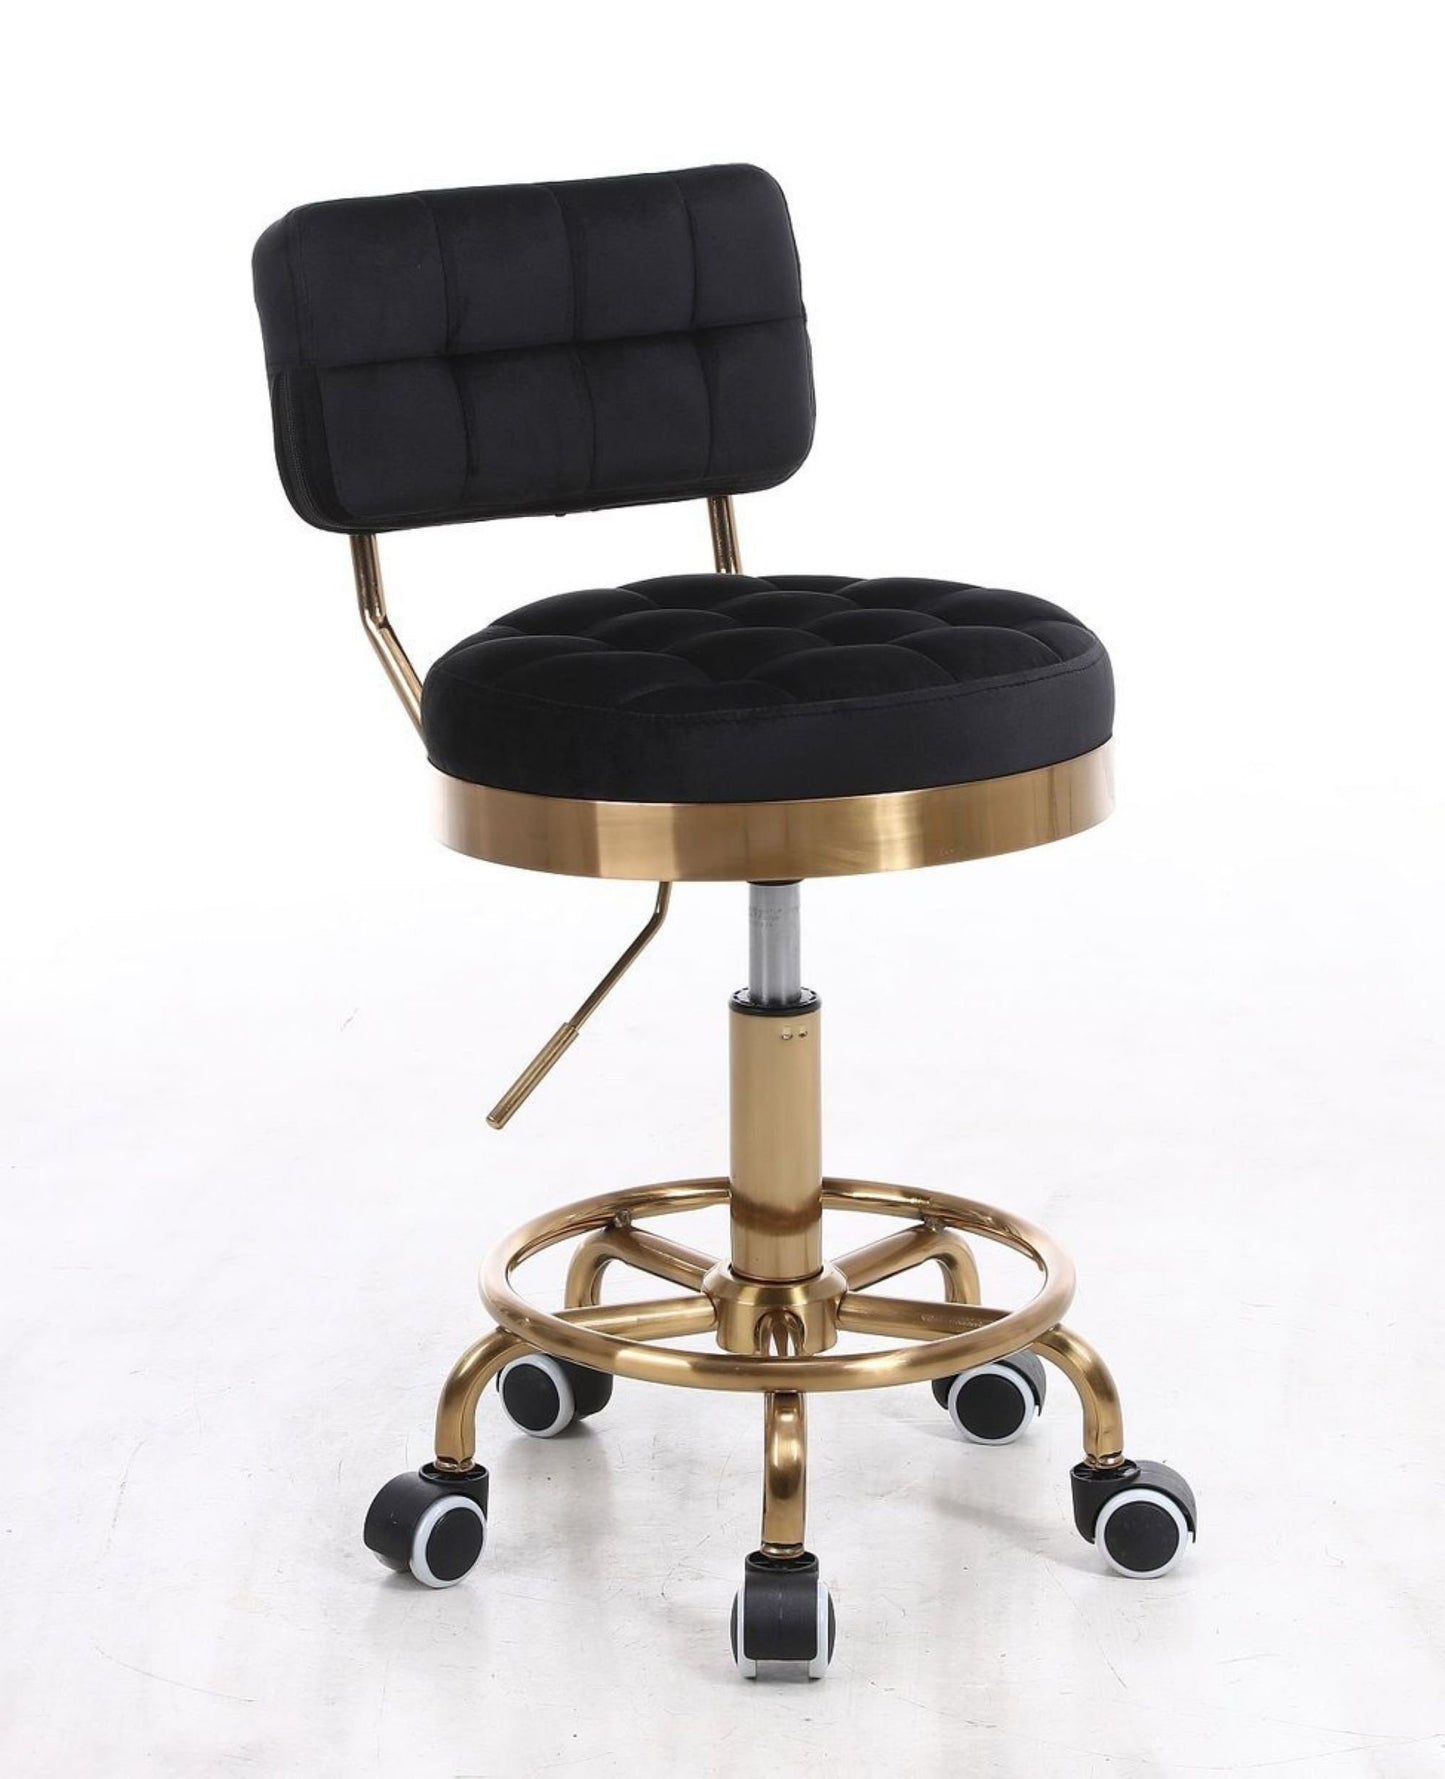 Beautiful & stylish Designer adjustable swivel office/desk hairdresser chair with gold base in velvet or leather Many Colours